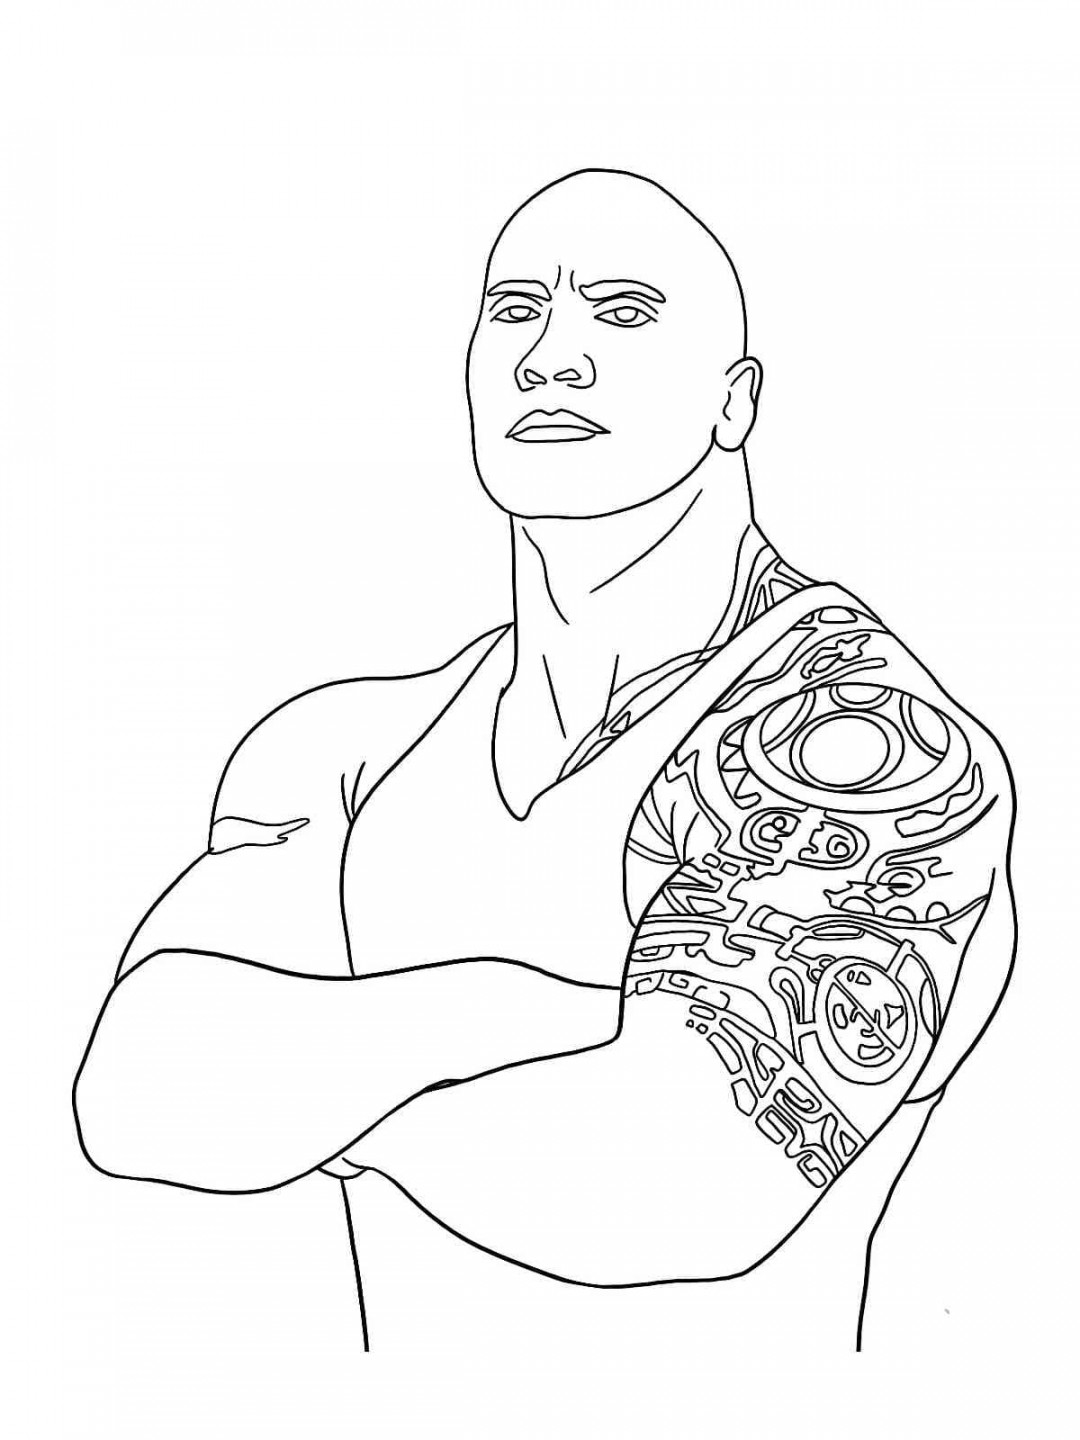 Dwayne The Rock Johnson coloring page - Download, Print or Color